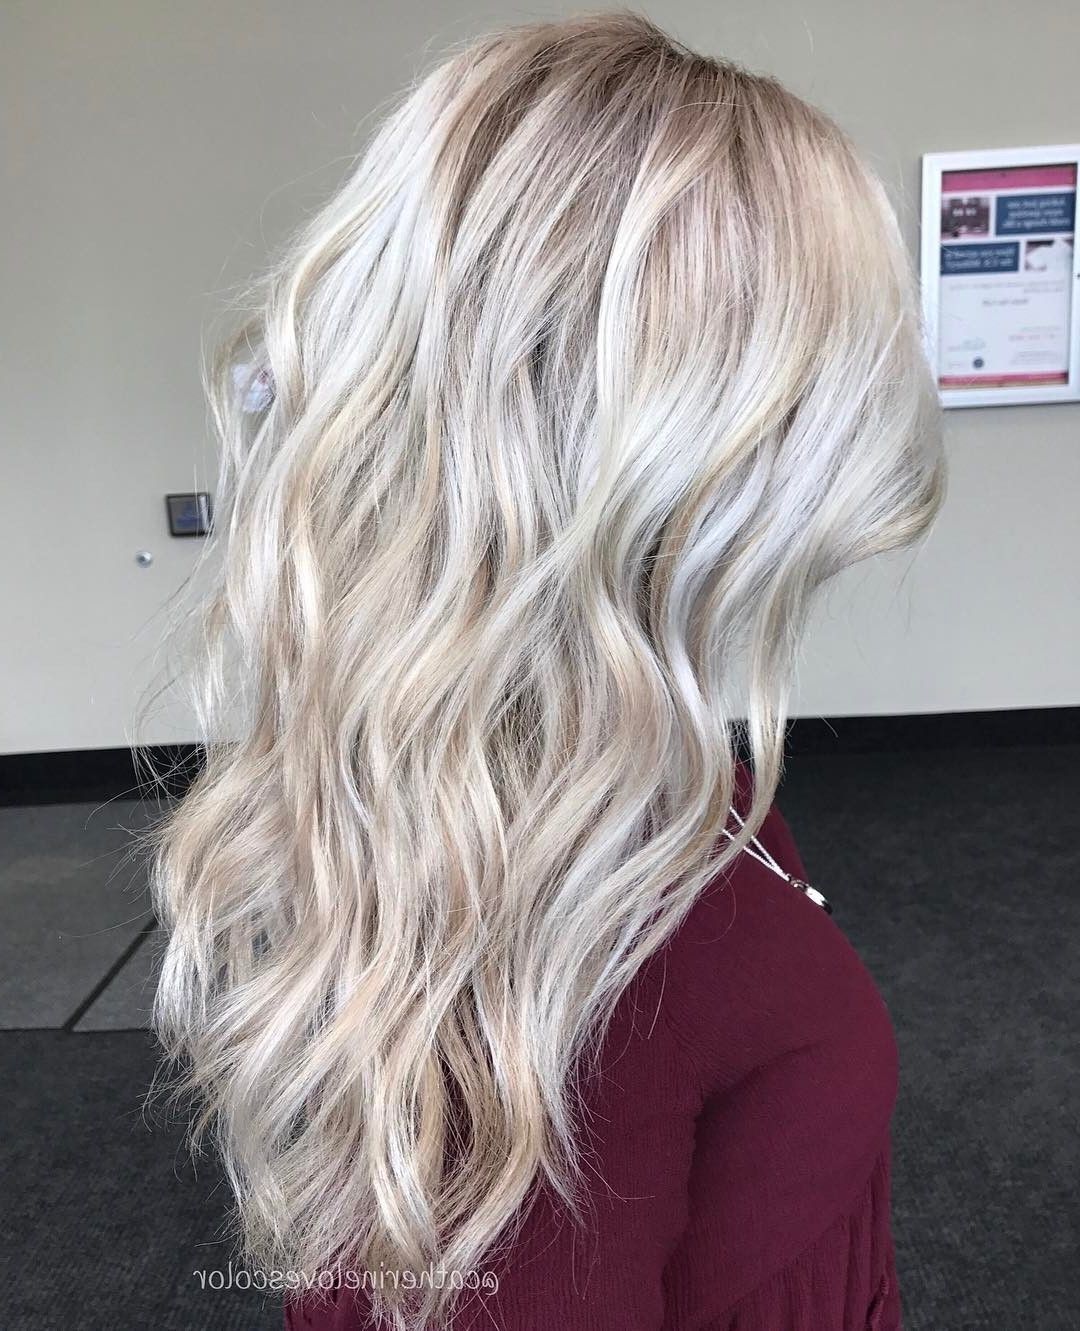 Preferred Sunkissed Long Locks Blonde Hairstyles Pertaining To 20 Adorable Ash Blonde Hairstyles To Try: Hair Color Ideas  (View 12 of 20)